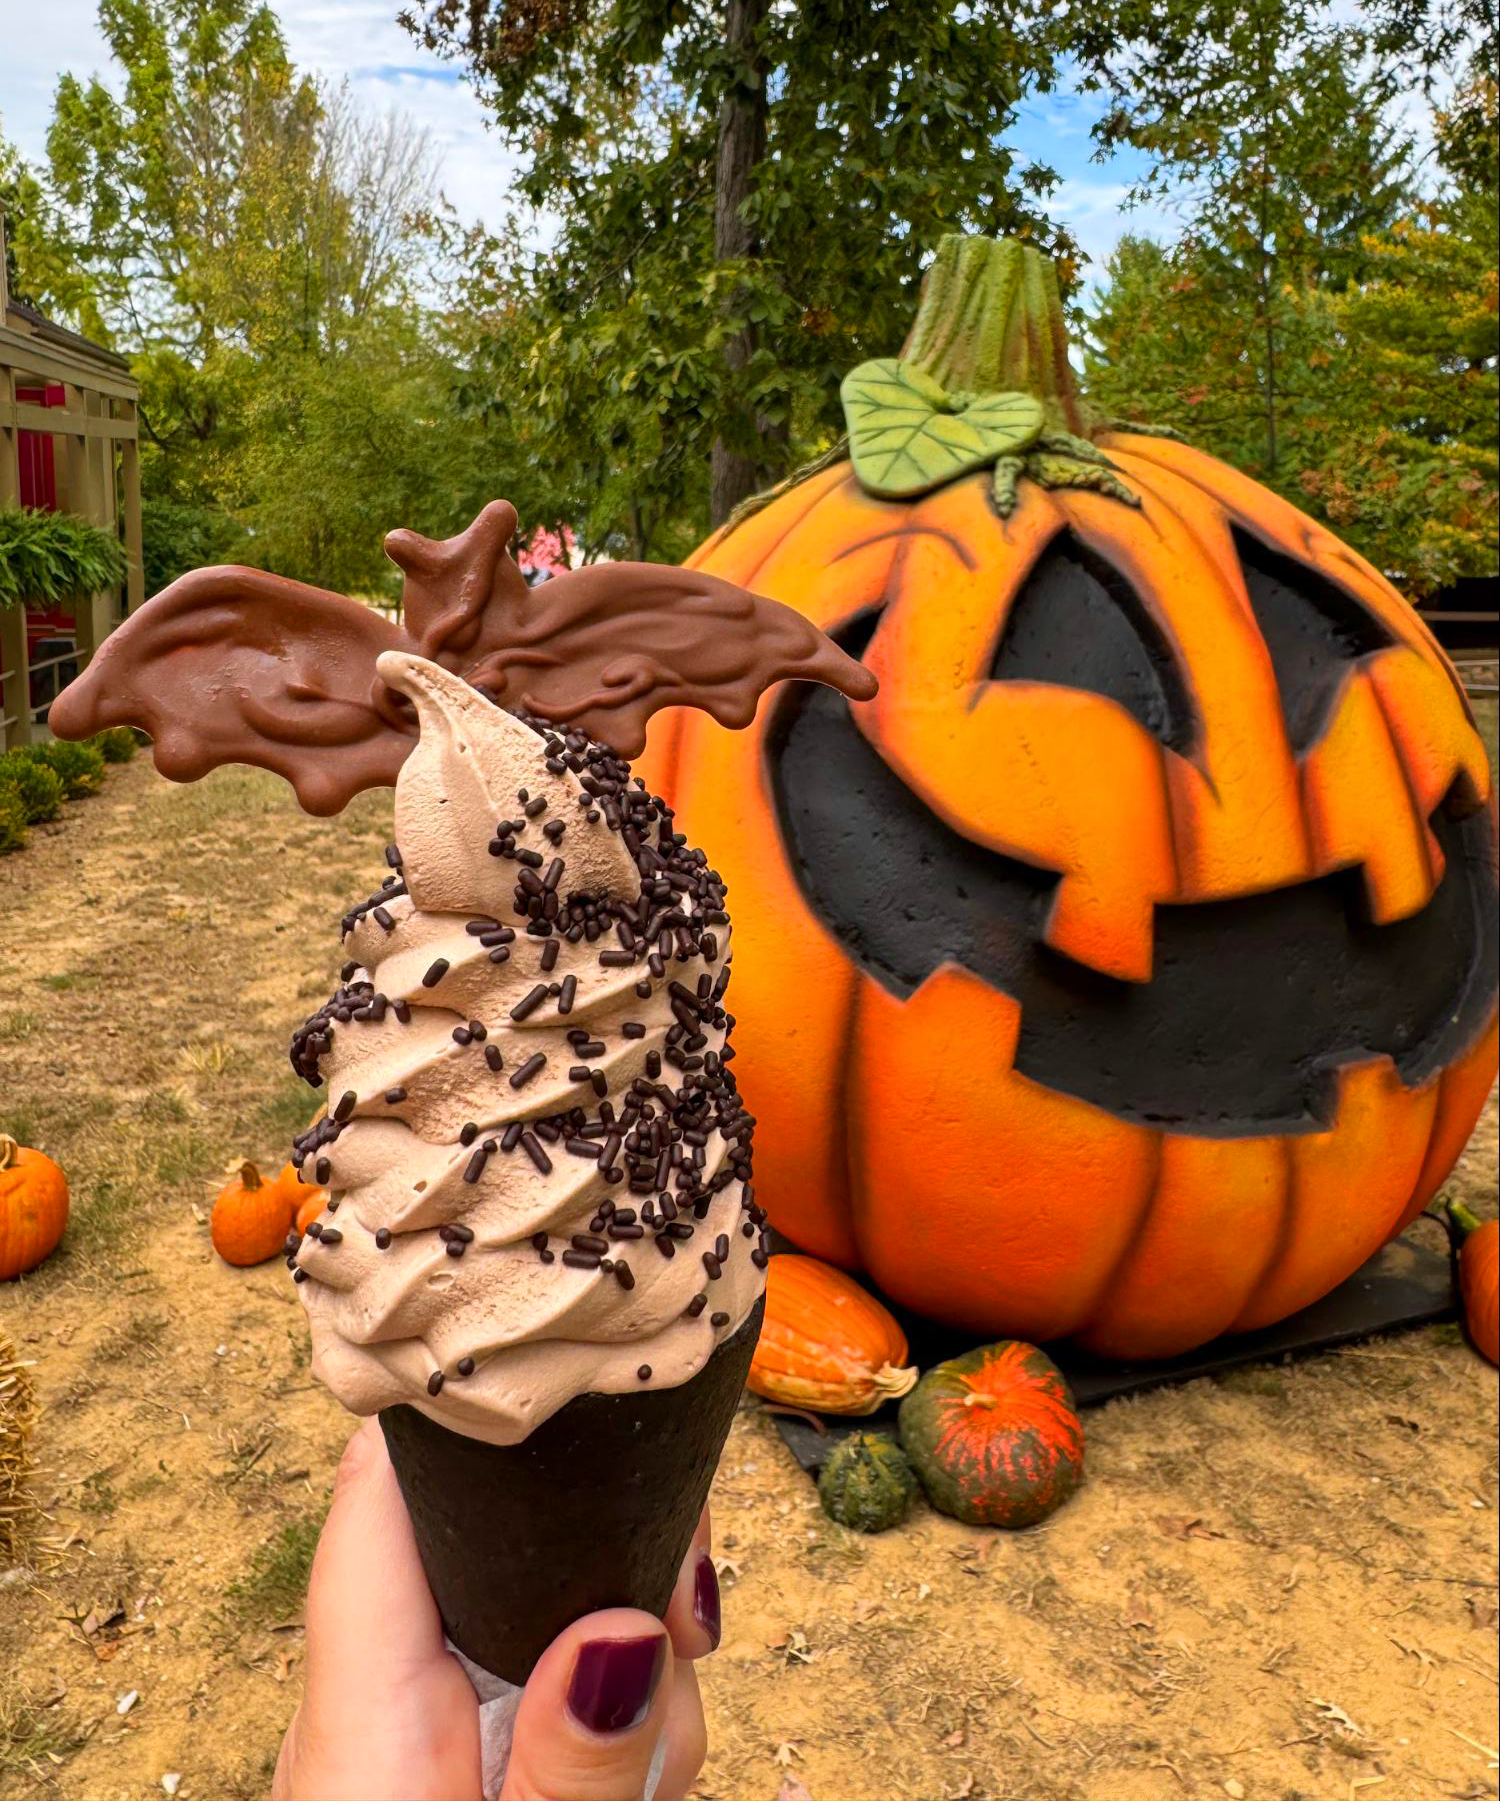 Ice cream available during Happy Halloween Weekends.